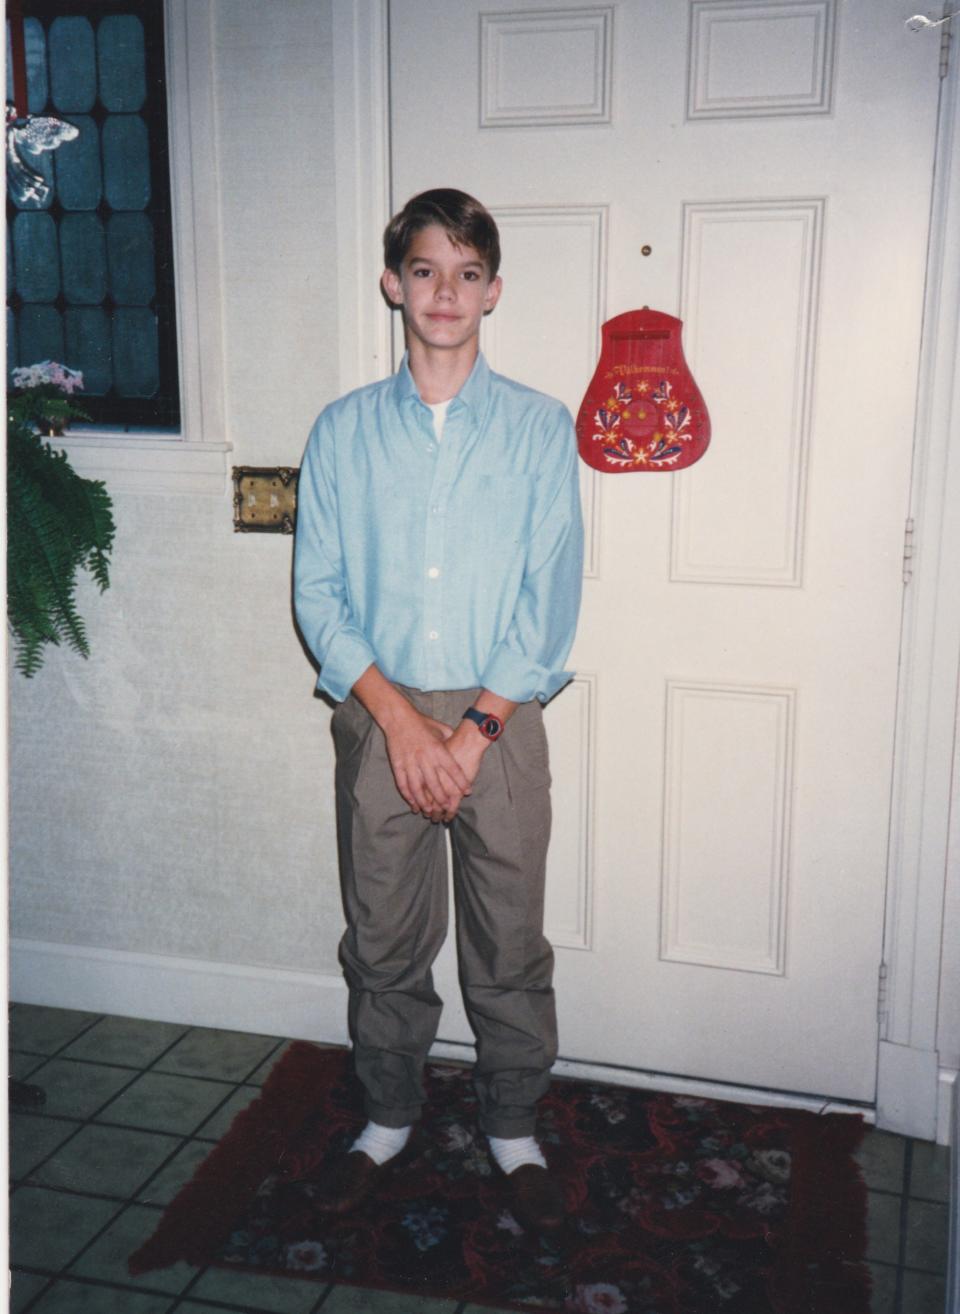 A photo provided by Nate Lindstrom shows him at age 14 on the first day of his freshman year of high school.